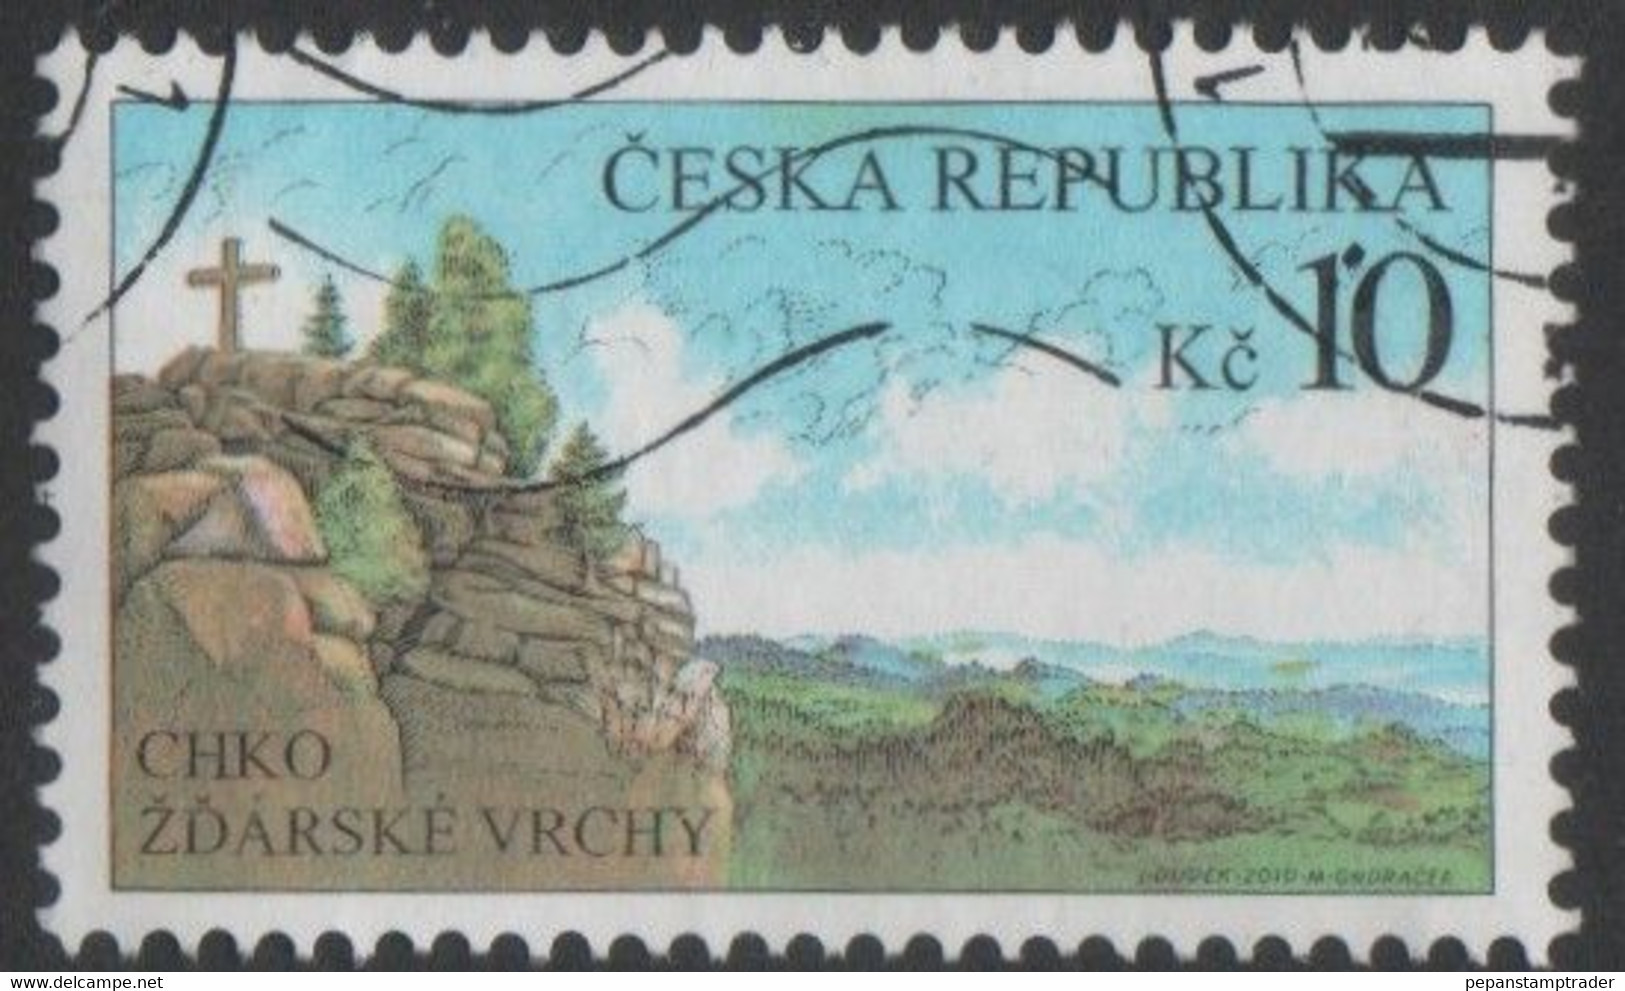 Czech Rep. - #3456 -  Used - Used Stamps